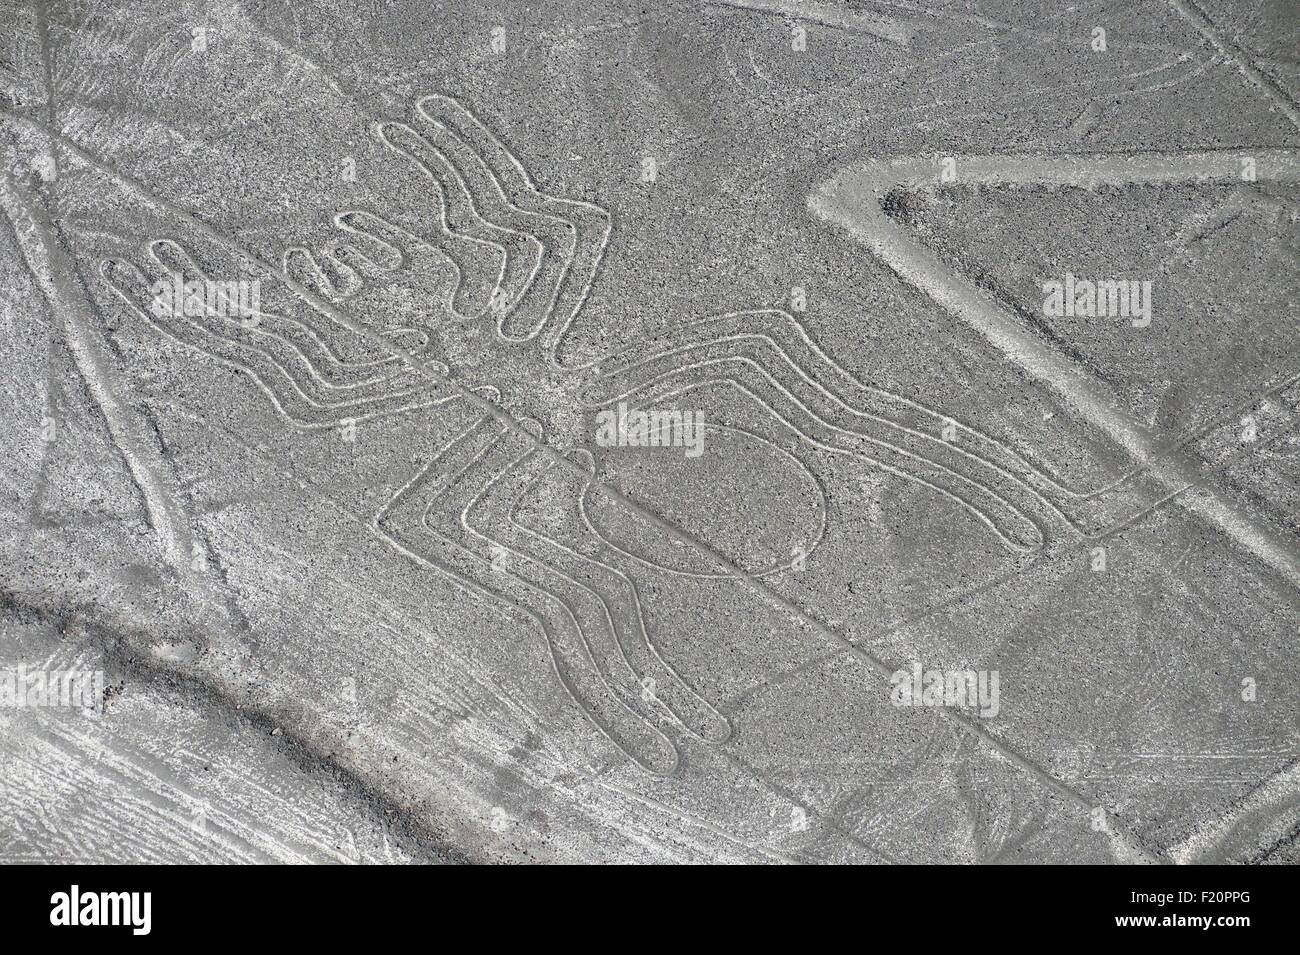 Peru, Ica Region, Nazca Desert, the Nazca Lines (5th-7th century), listed as World Heritage site by UNESCO, the geoglyphs are large figures drawn on the ground, often stylized animals, spider (47 m long), aerial view Stock Photo